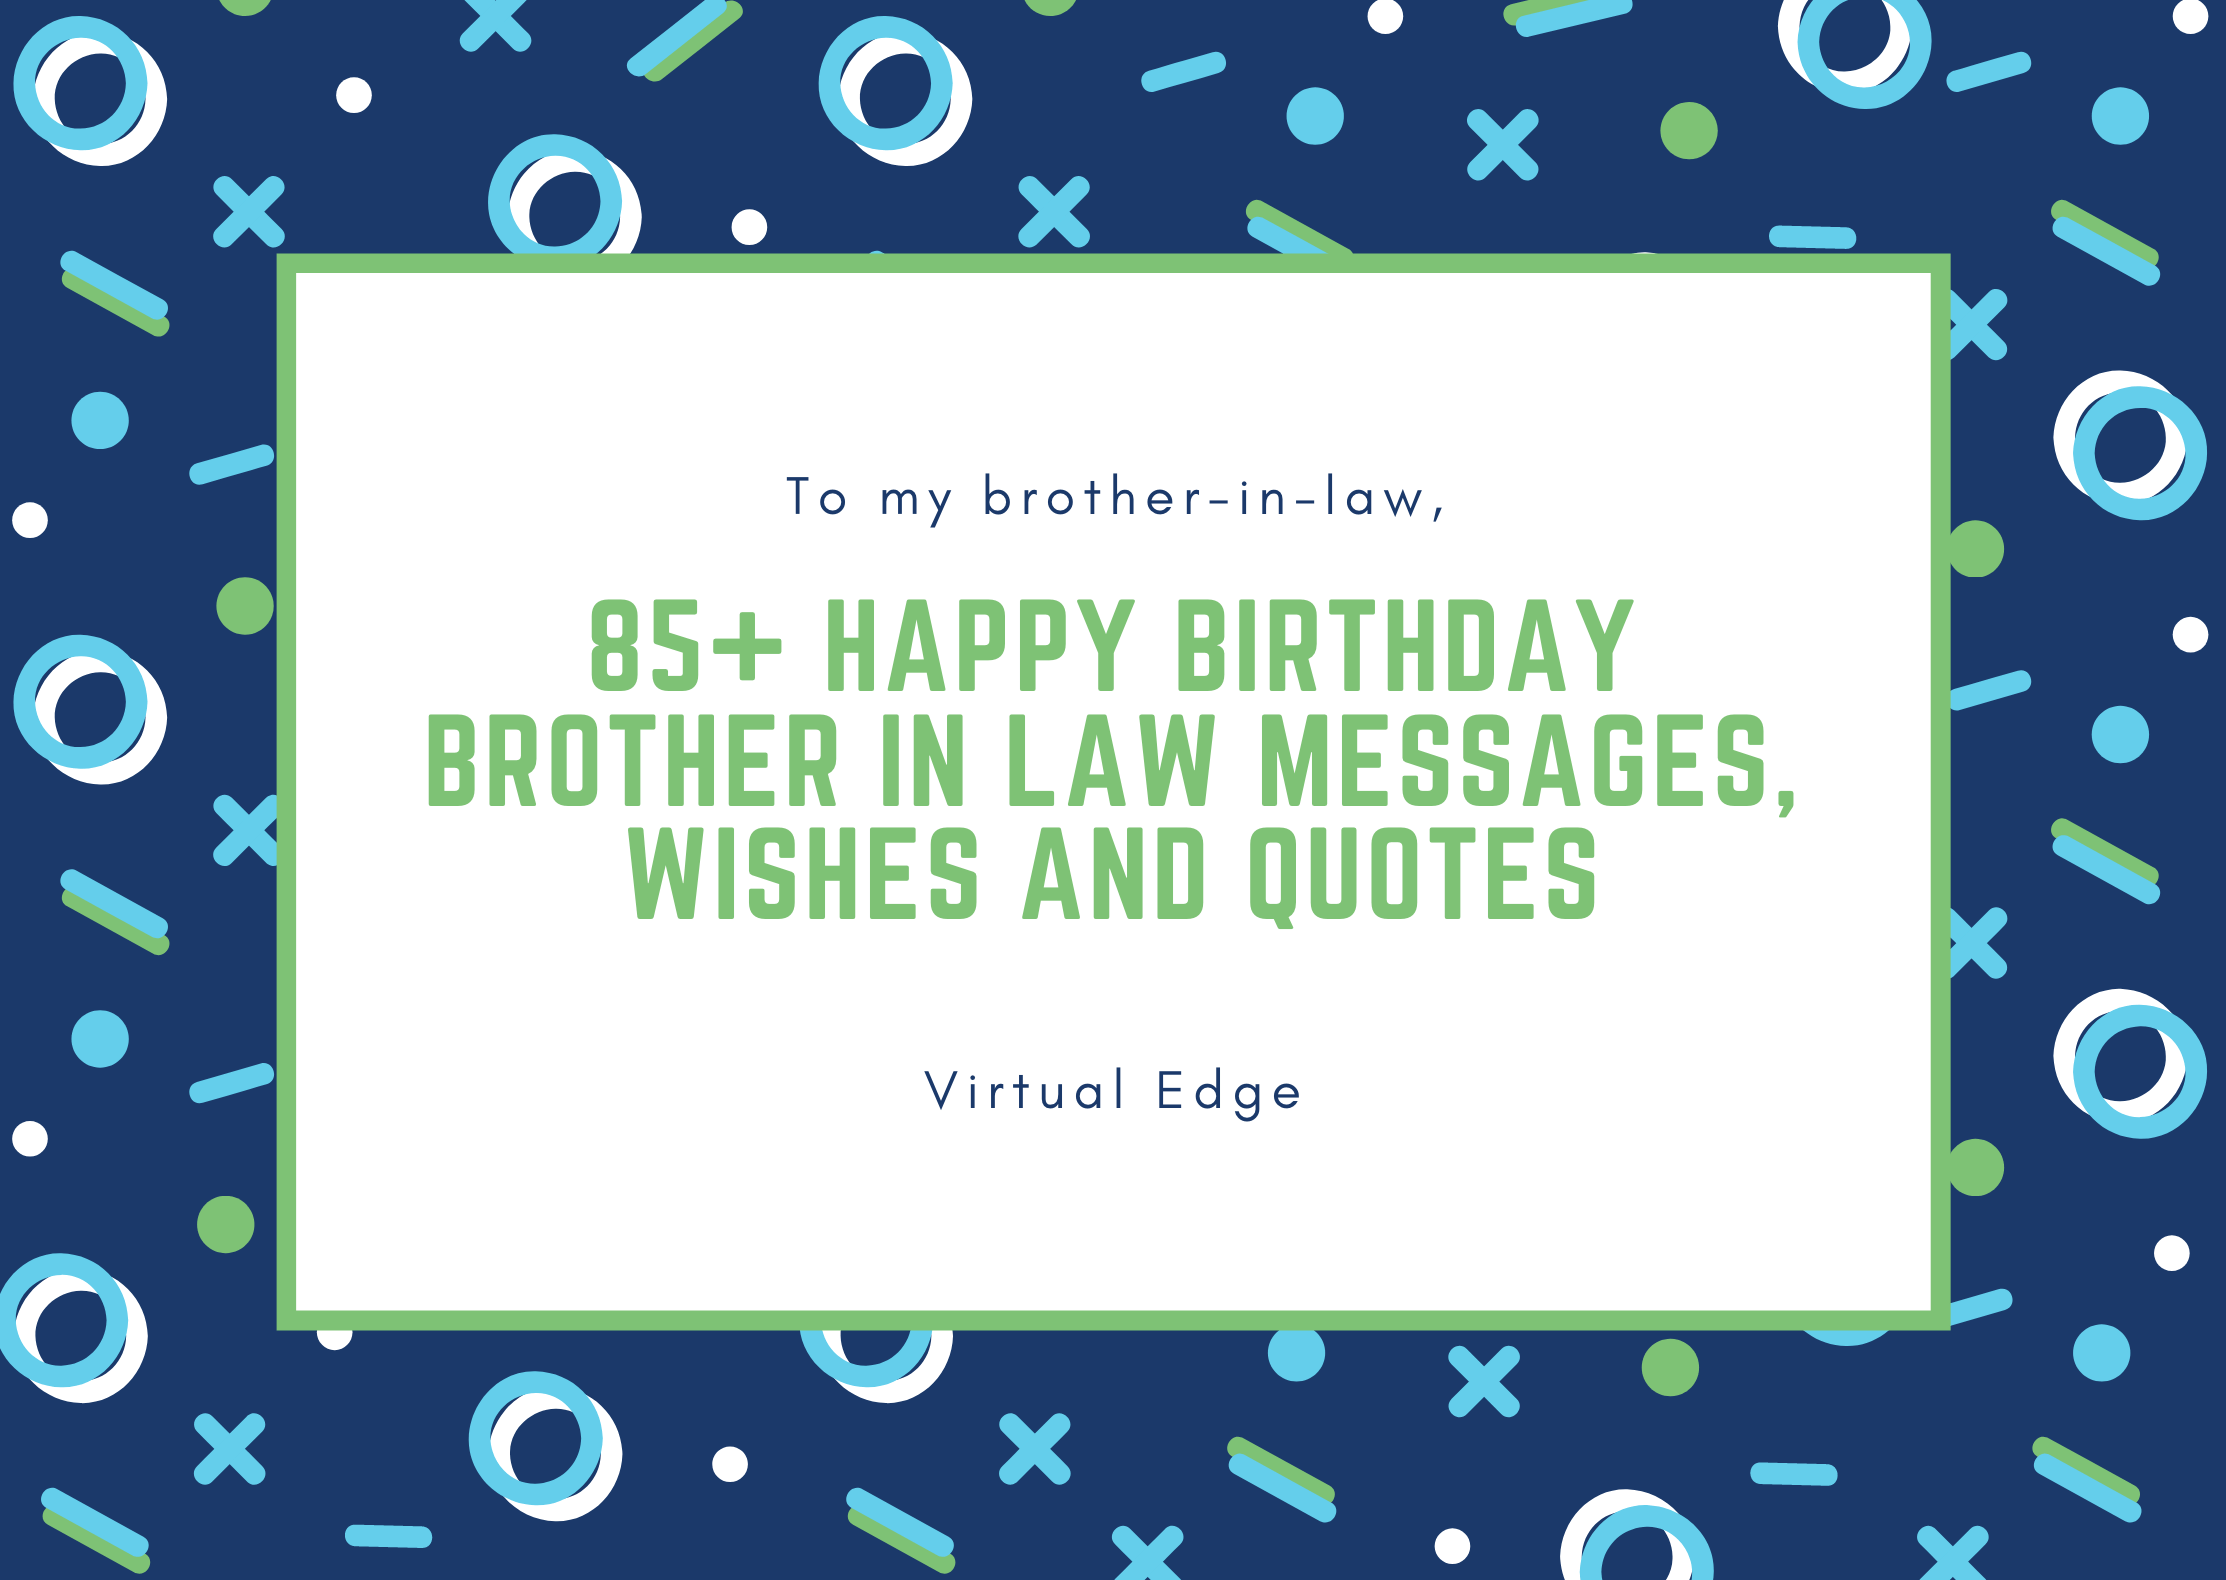 85+ Happy Birthday Brother In Law Messages, Wishes and Quotes